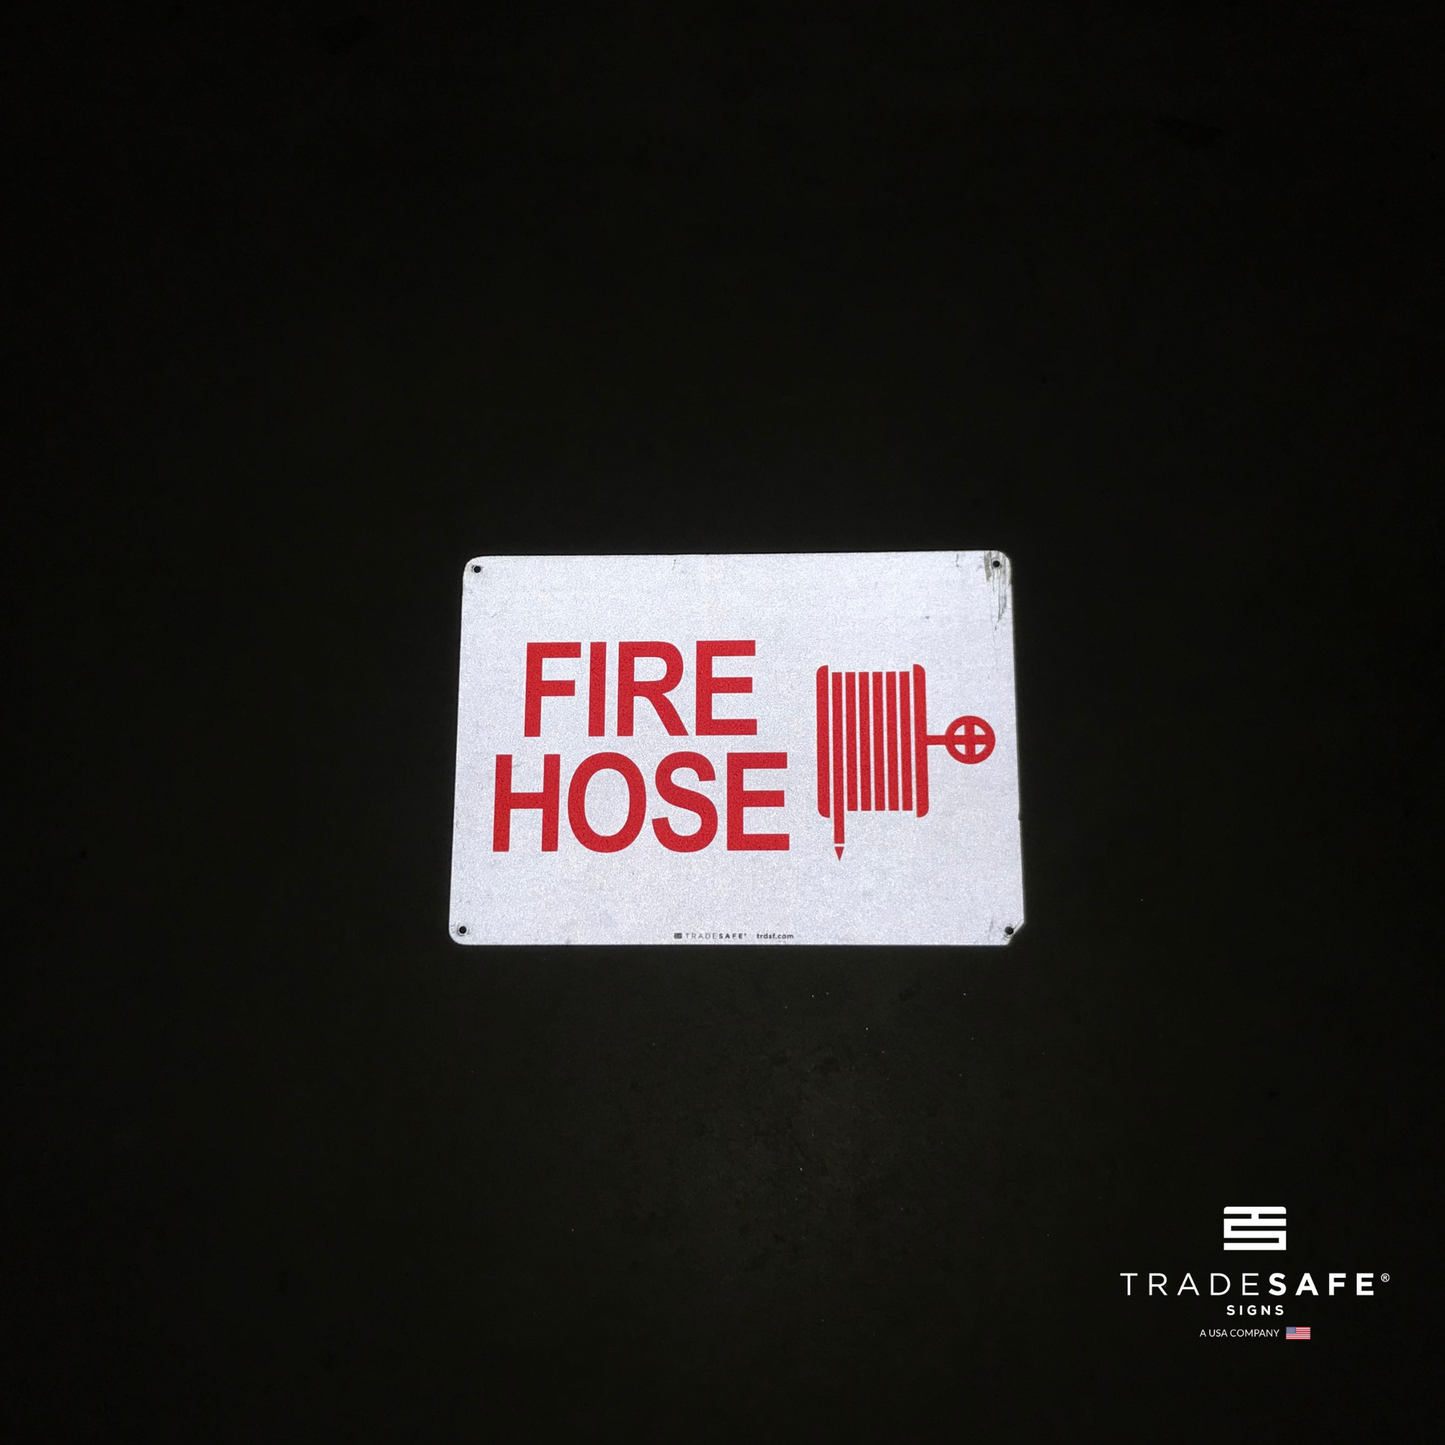 reflective attribute of fire hose sign on black background